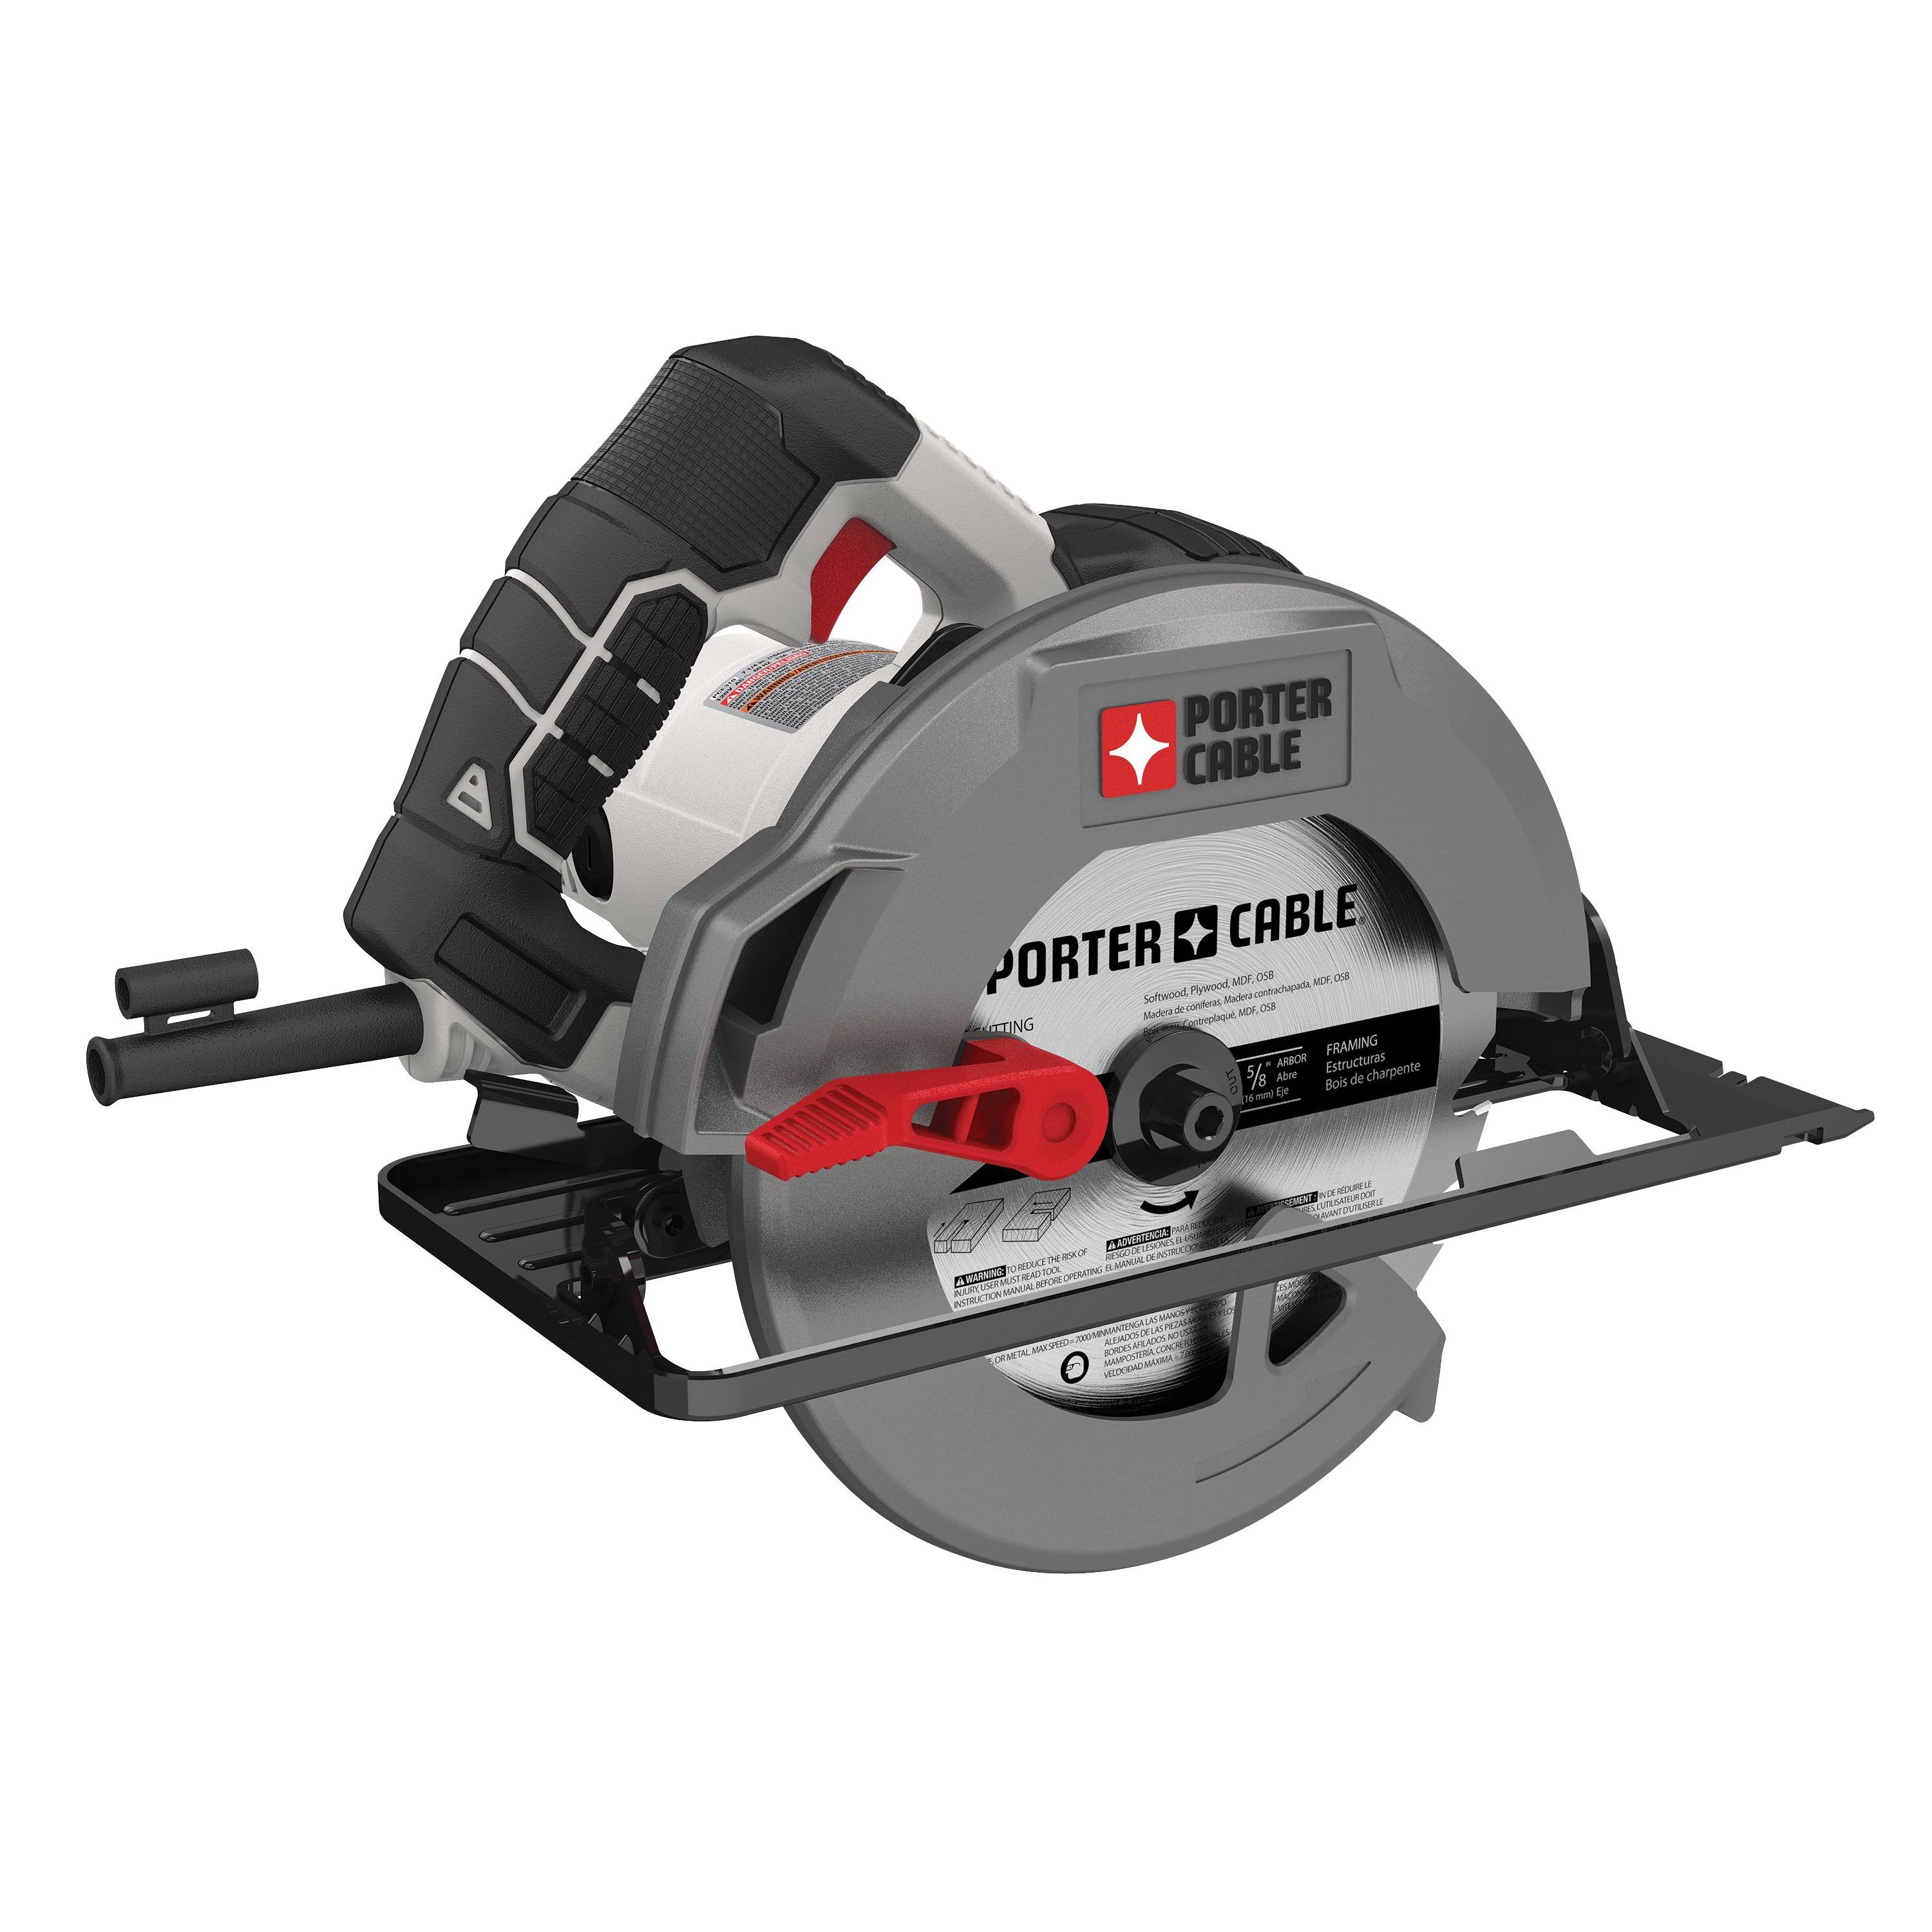 Porter-Cable Heavy Duty Steel Shoe Circular Saw - 15A